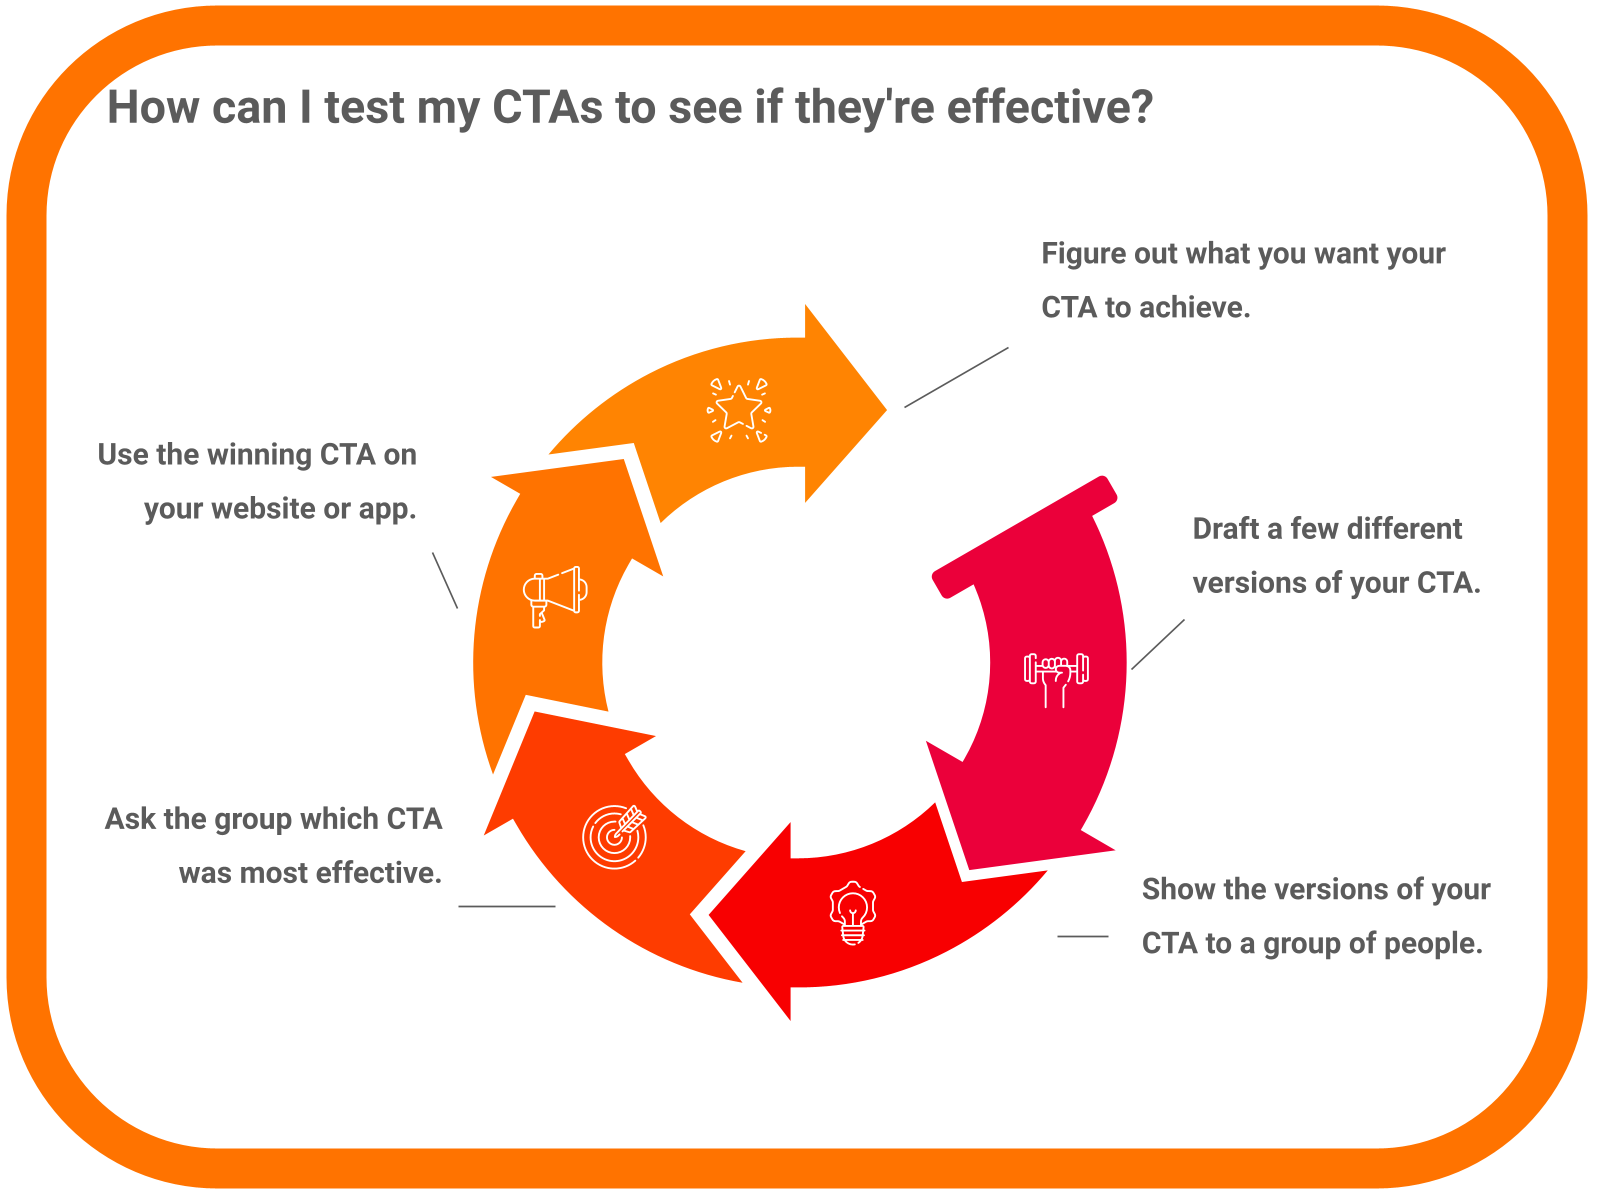 How can I test my CTAs to see if they’re effective?